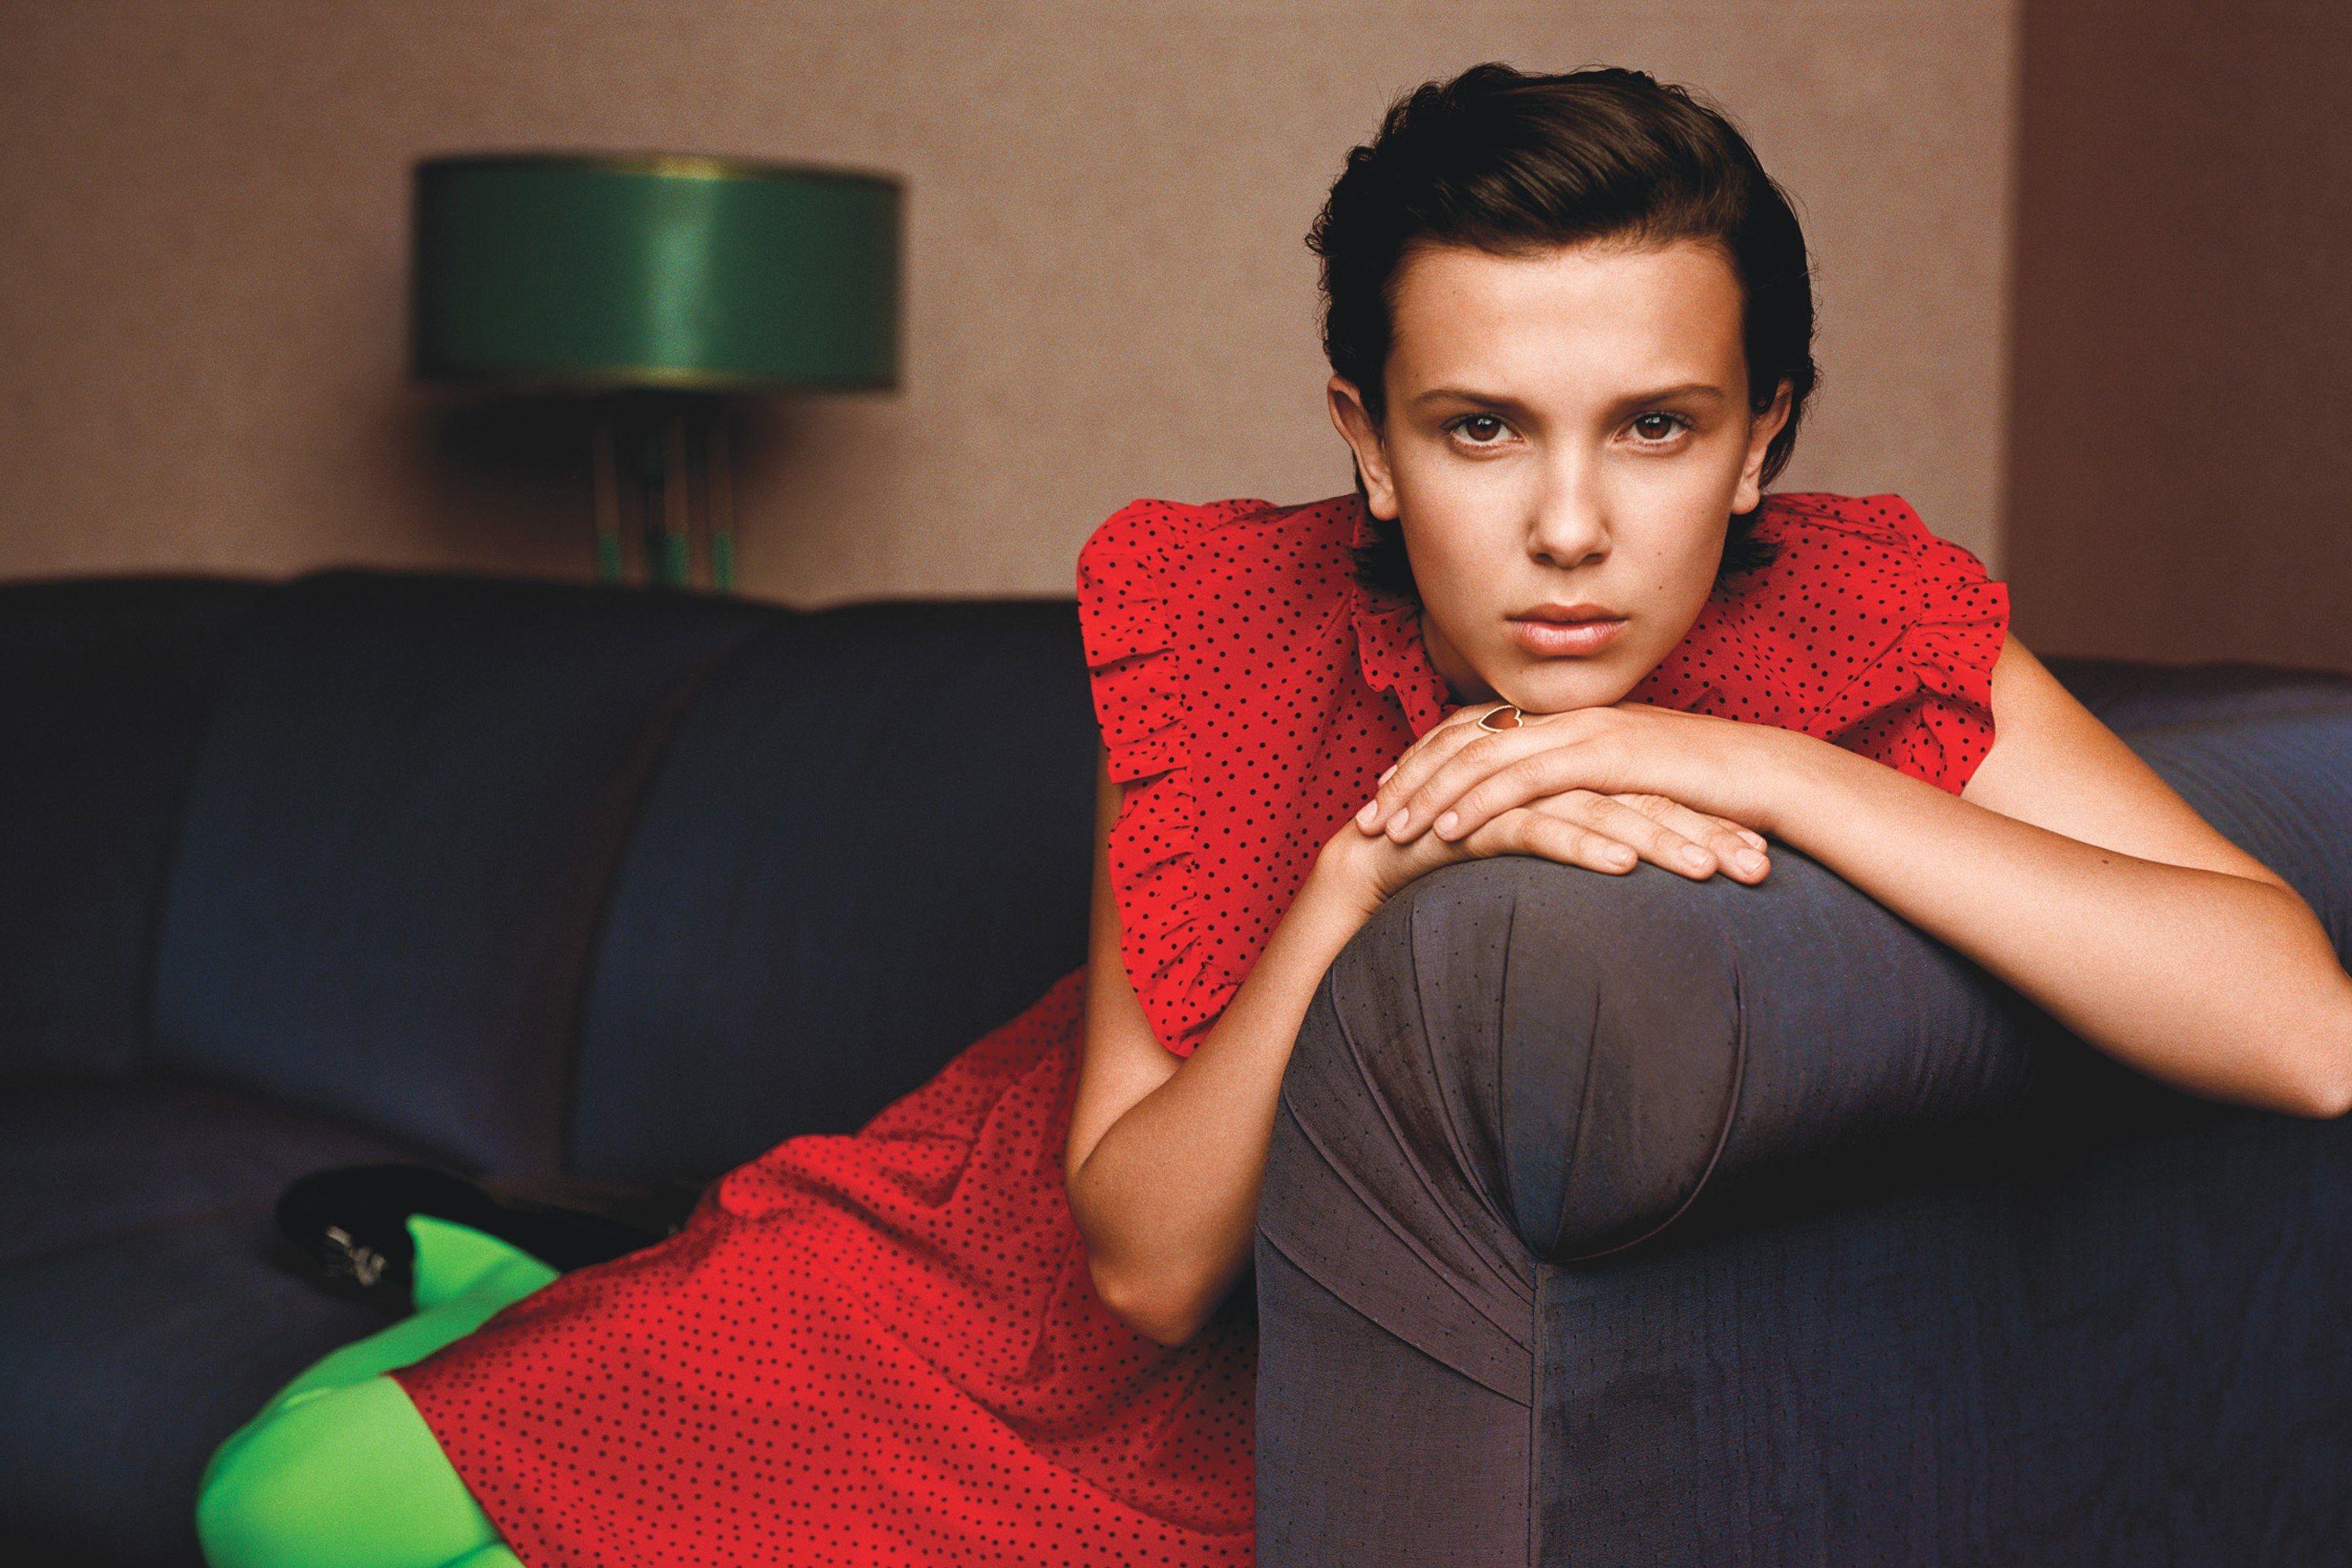 Millie Bobby Brown Photoshoot 2021 Wallpapers